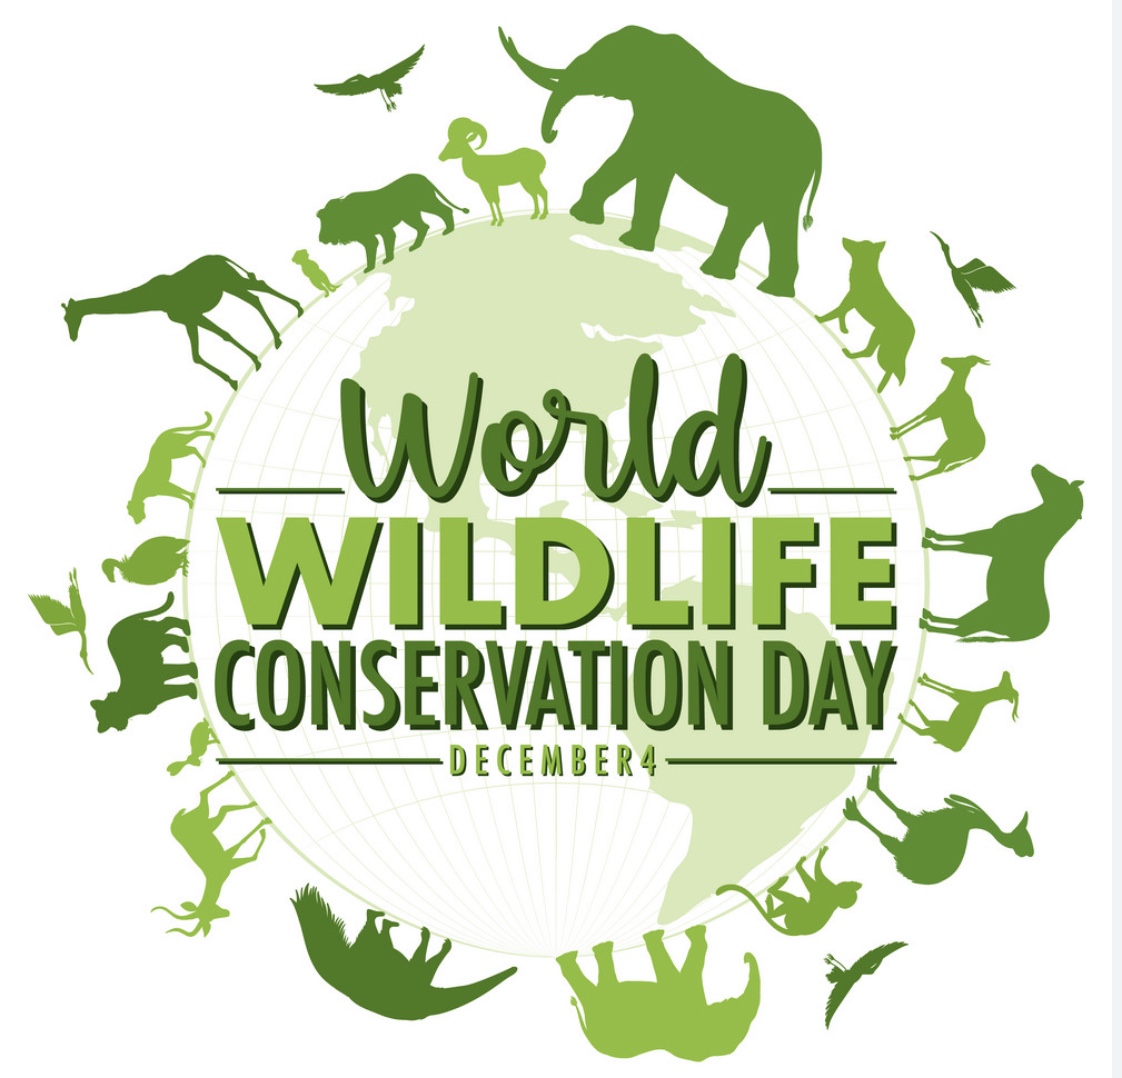 Happy #WildlifeConservationDay! Today is a day to reflect on how we can care for the amazing creatures we share our planet with. #ConnectWithNature #LoveOurPlanet 🐘 🌲🐅